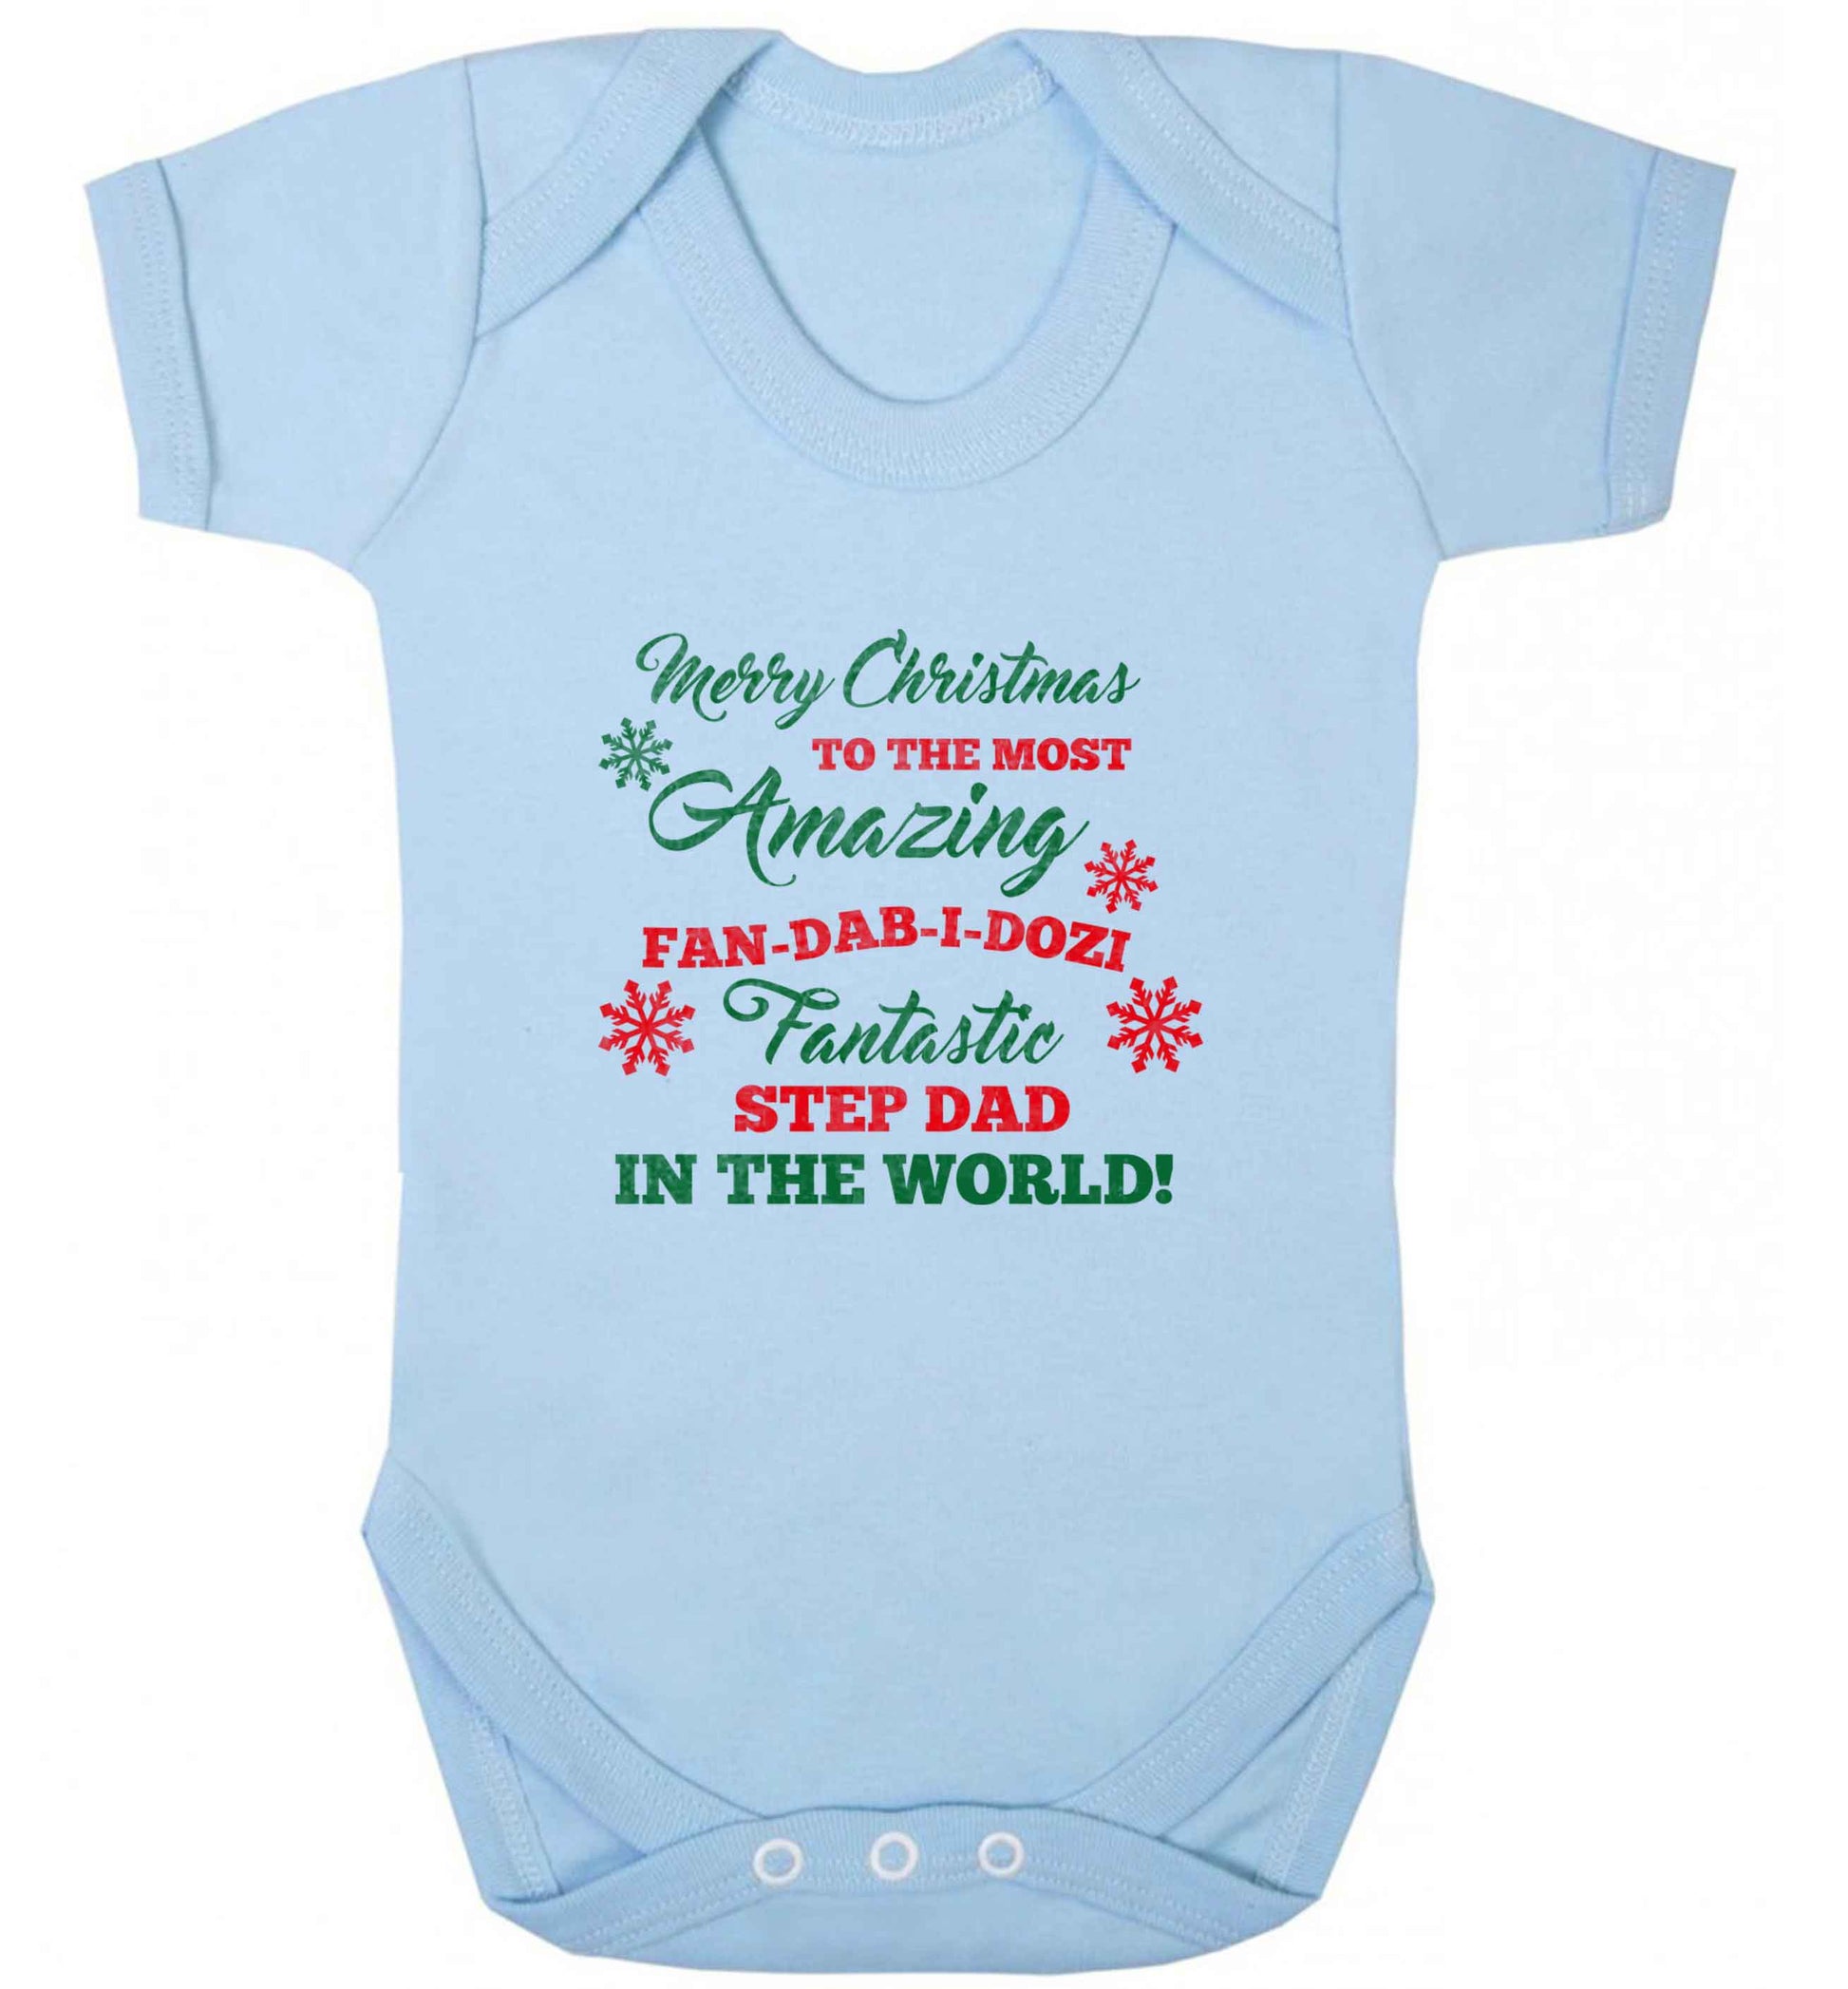 Merry Christmas to the most amazing fan-dab-i-dozi fantasic Step Dad in the world baby vest pale blue 18-24 months